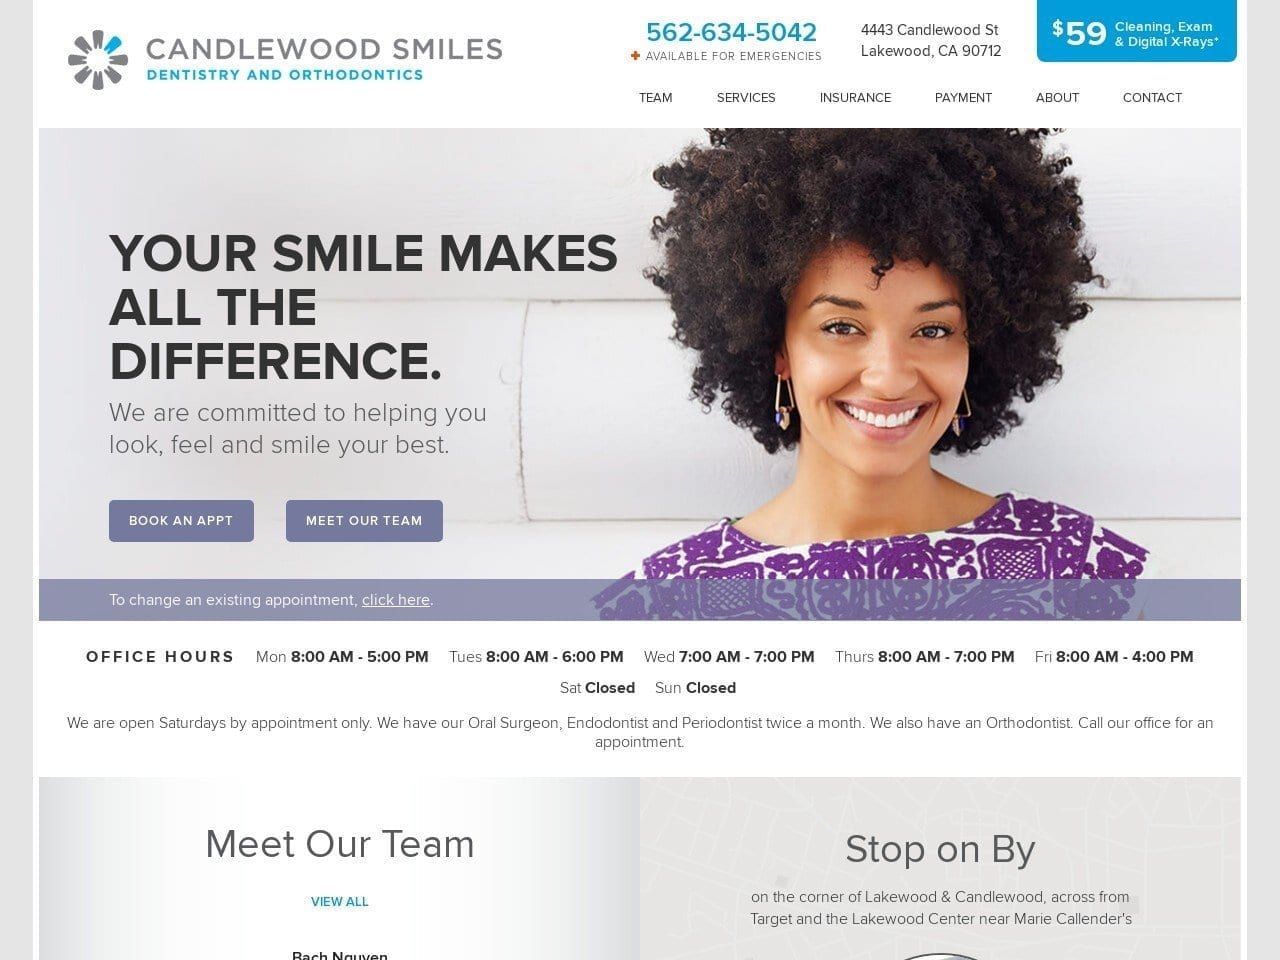 Candlewood Smiles Dentistry and Orthodontics Website Screenshot from candlewoodsmiles.com